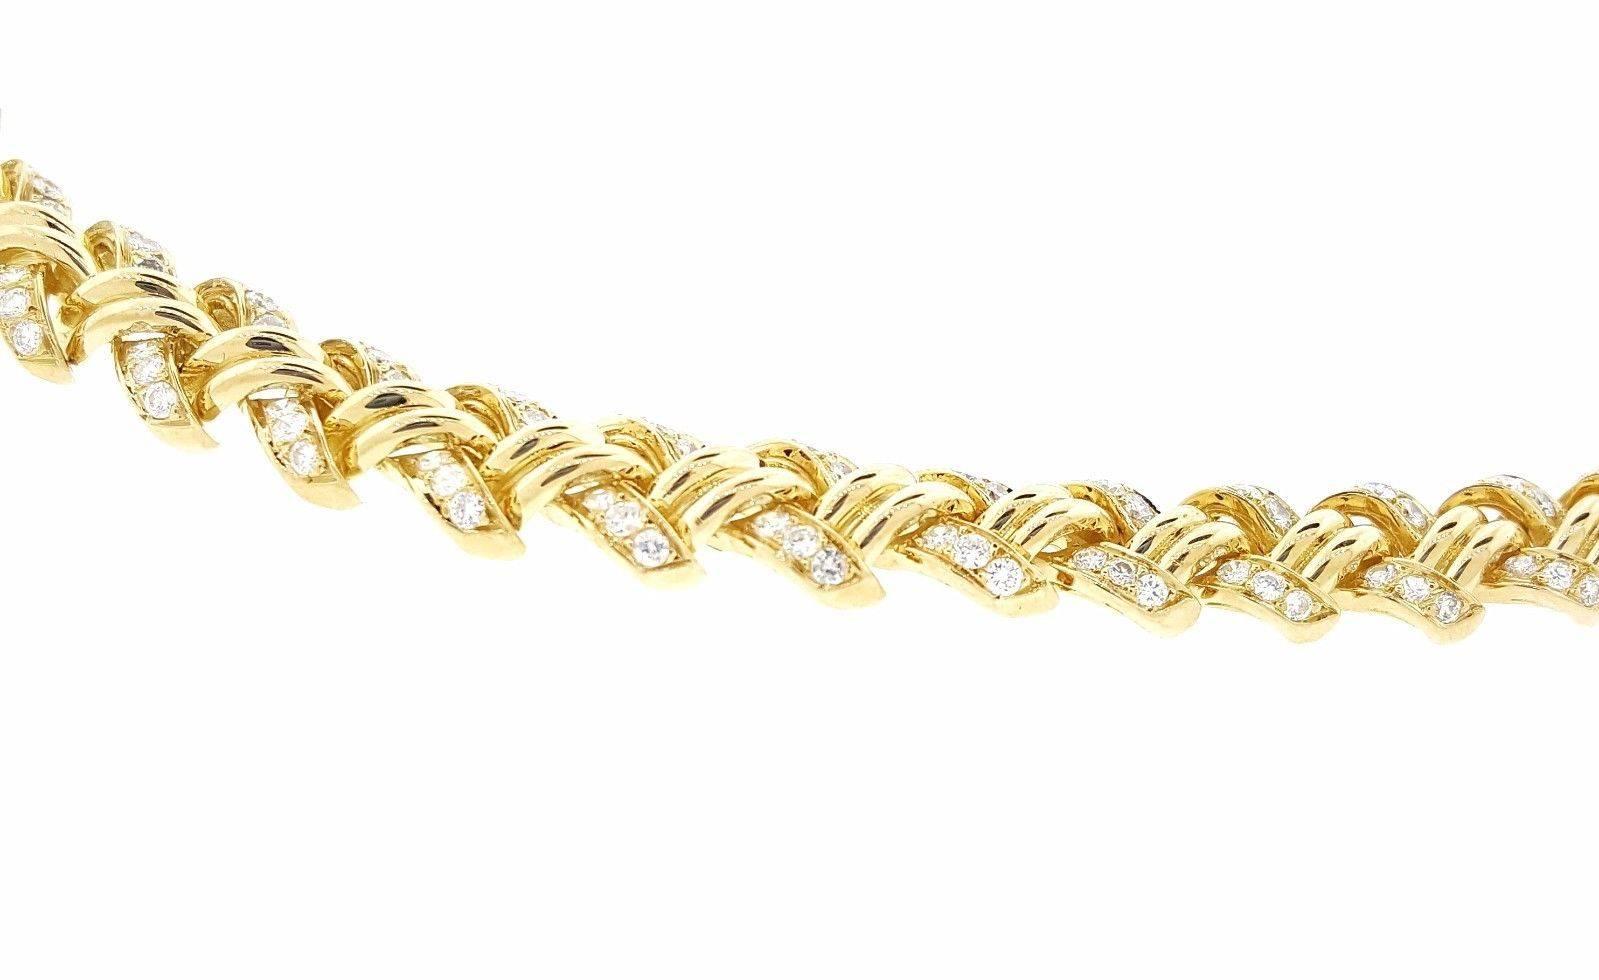 French made diamond choker necklace in 18k yellow gold featuring Round Brilliant Diamonds set in braid style design, graduating in size all the way around the neck. Total carat weight is 10.00 cts. Round Diamonds, VS2-SI1 clarity, G-H color.